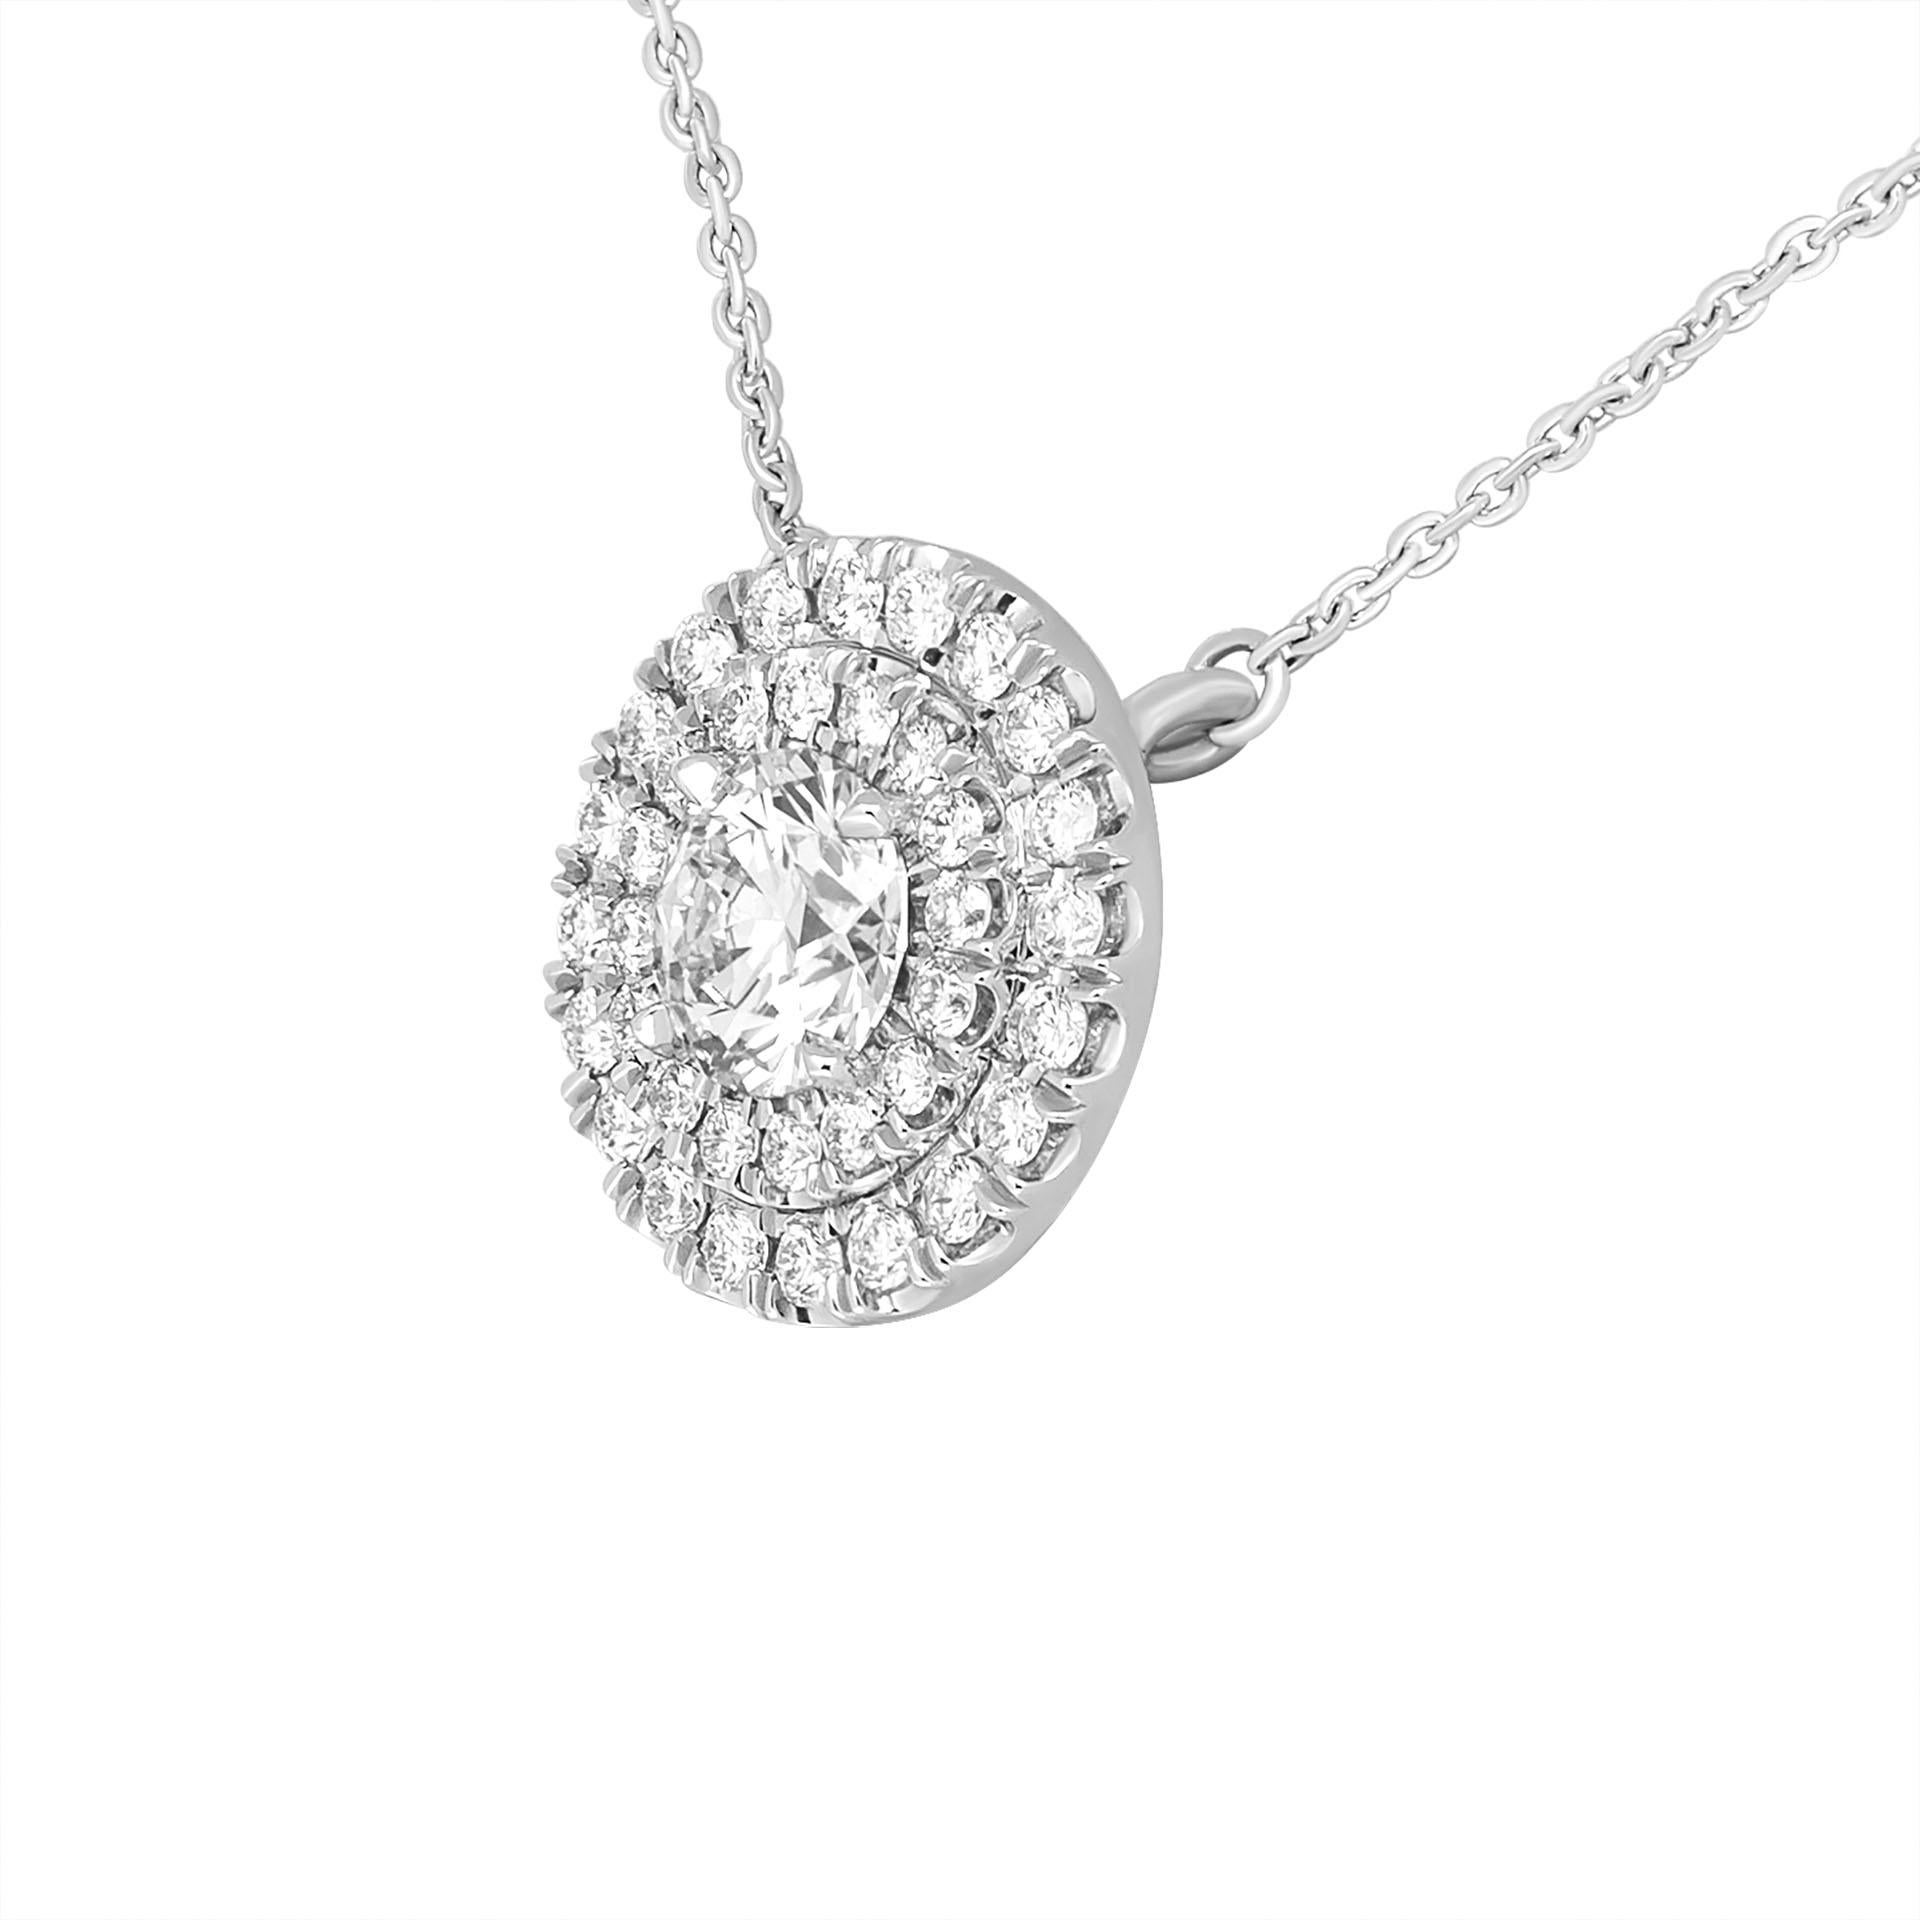 GIA Certified Double Halo Round Shaped Diamond Pendant in Platinum
With flower detailing on the back 
Center stone: 0.90ct D VVS2 Round shape Diamond GIA#2136880932 
Total carat weight of pave: 0.62ct (F/G VVS)